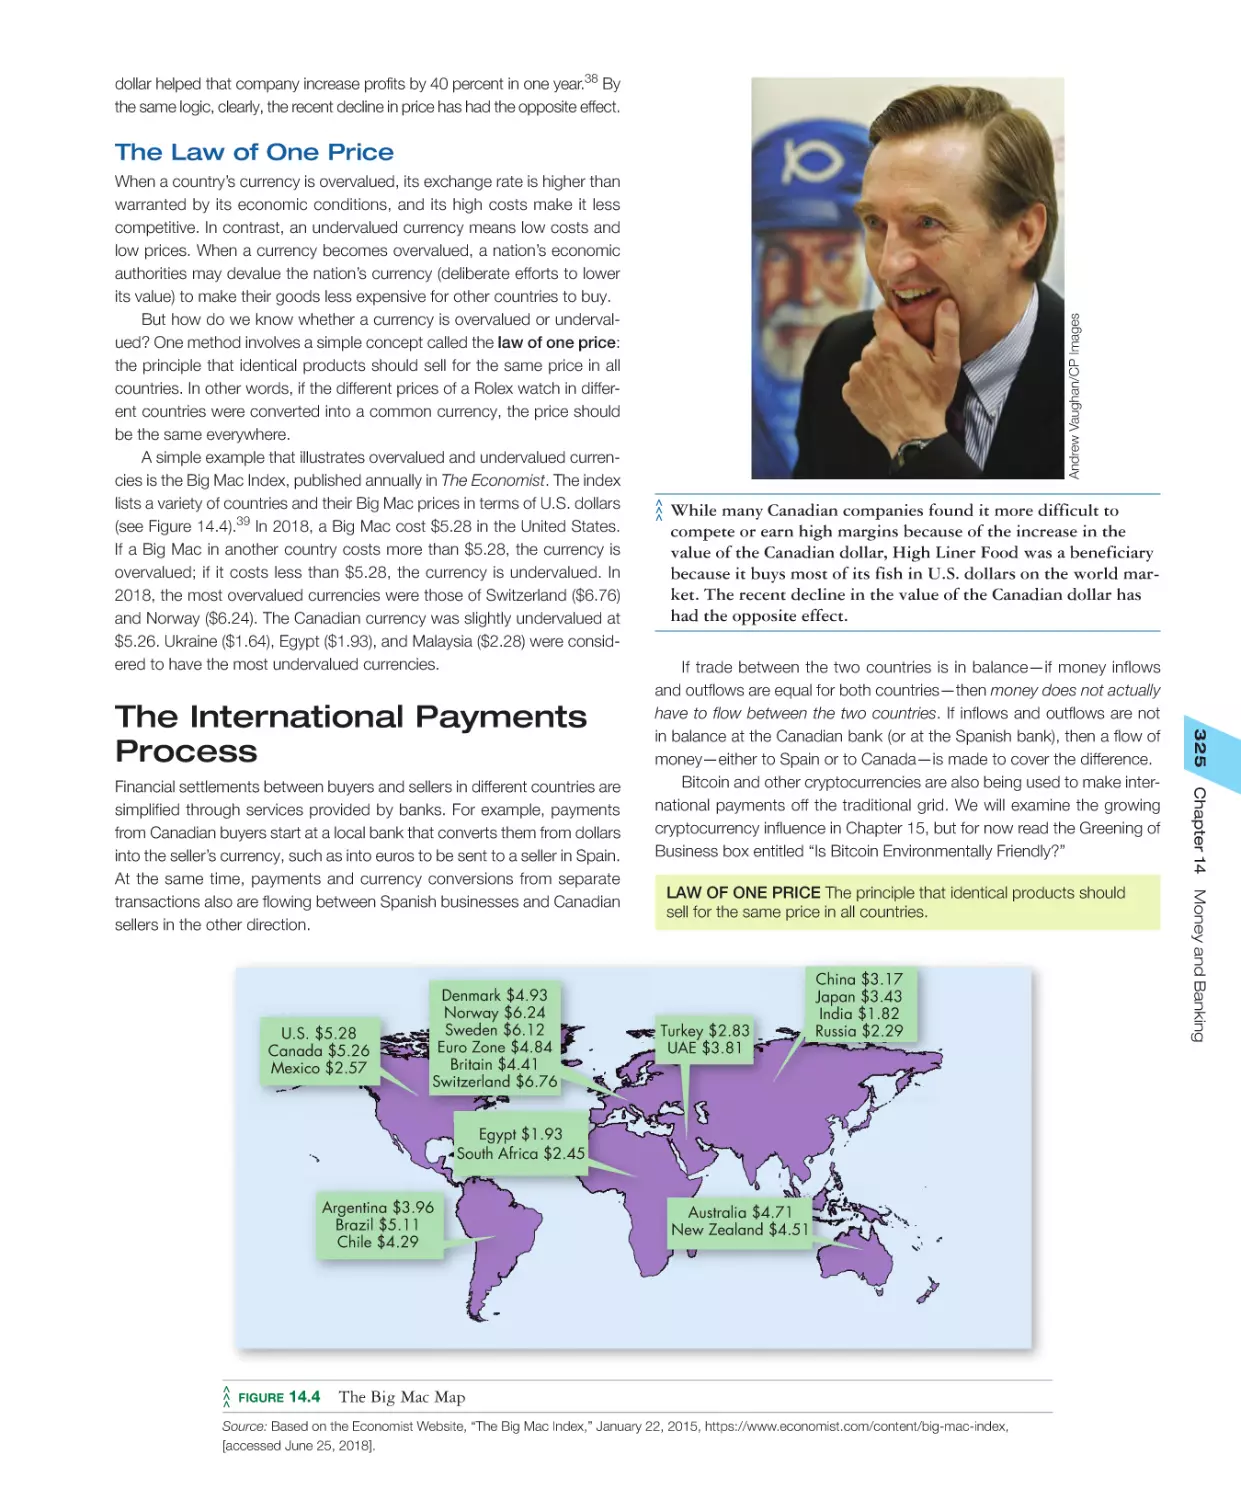 The International Payments Process